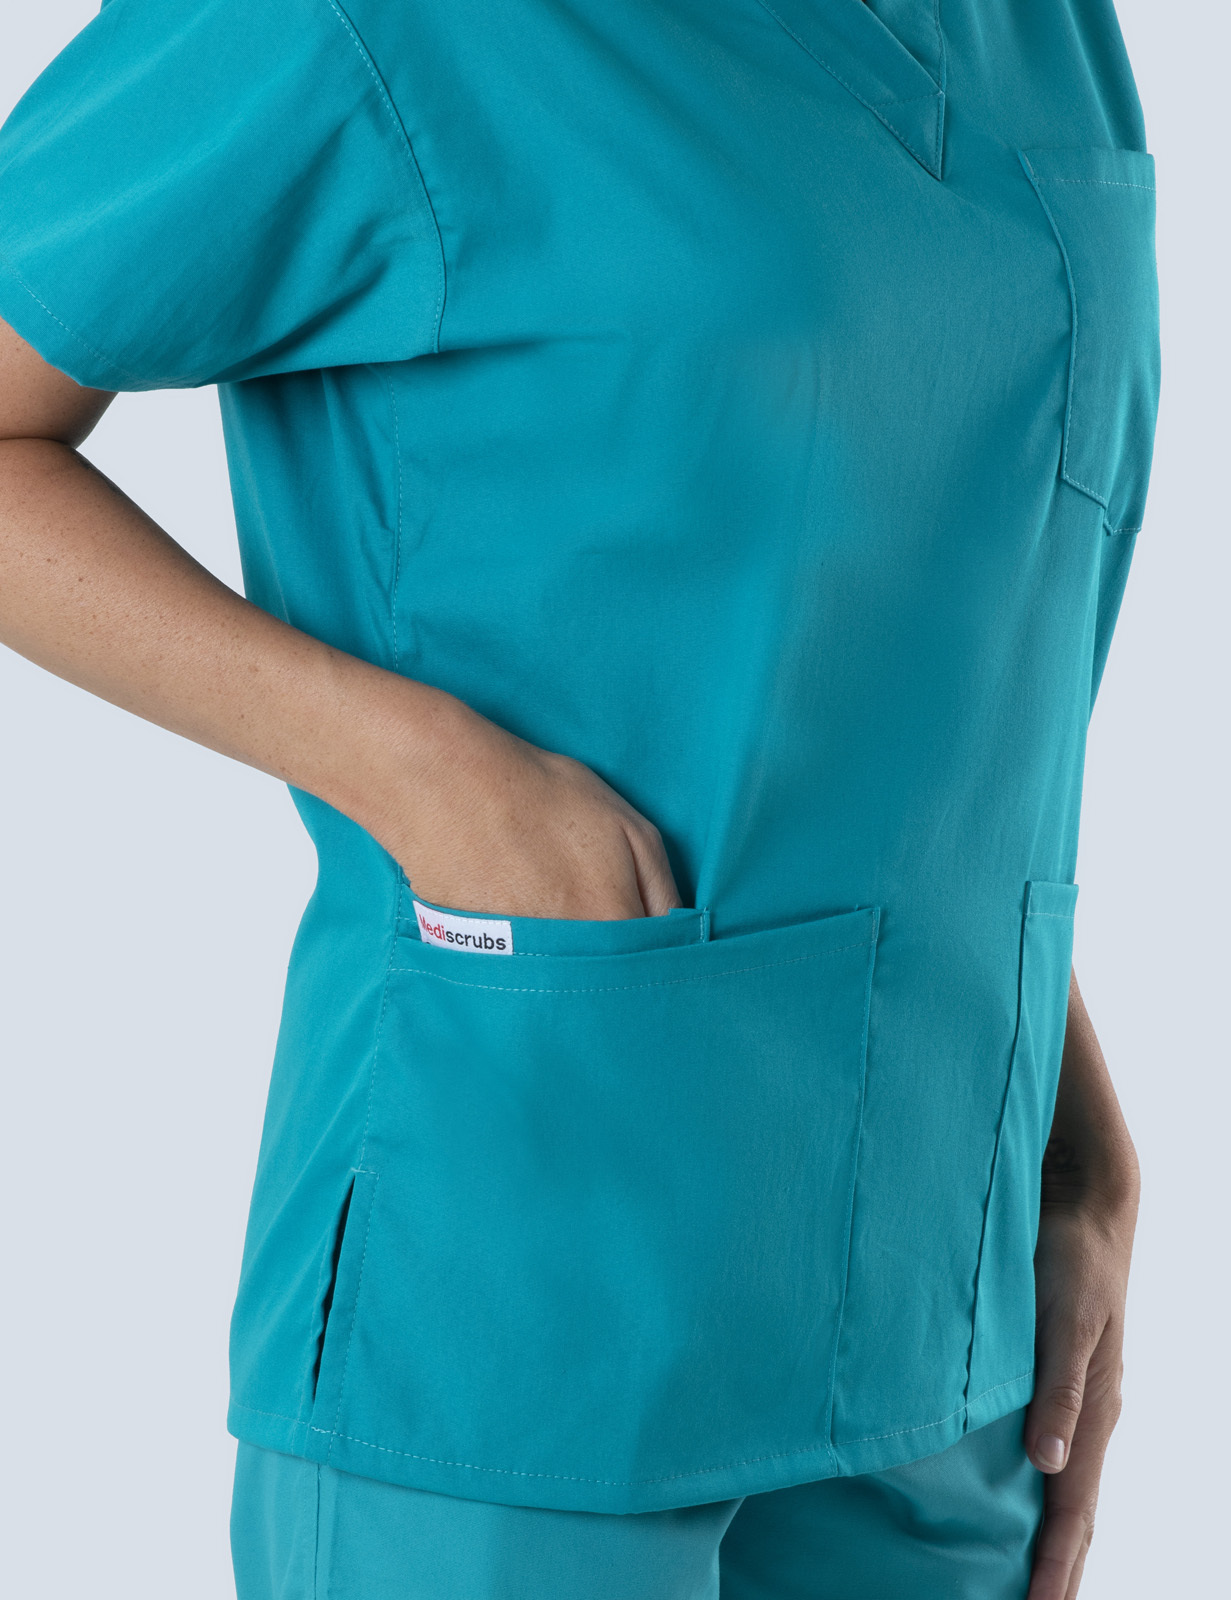 Gold Coast University Hospital Registered Midwife Uniform Set Bundle (4 Pocket Top and Cargo Pants in Teal with Logos)